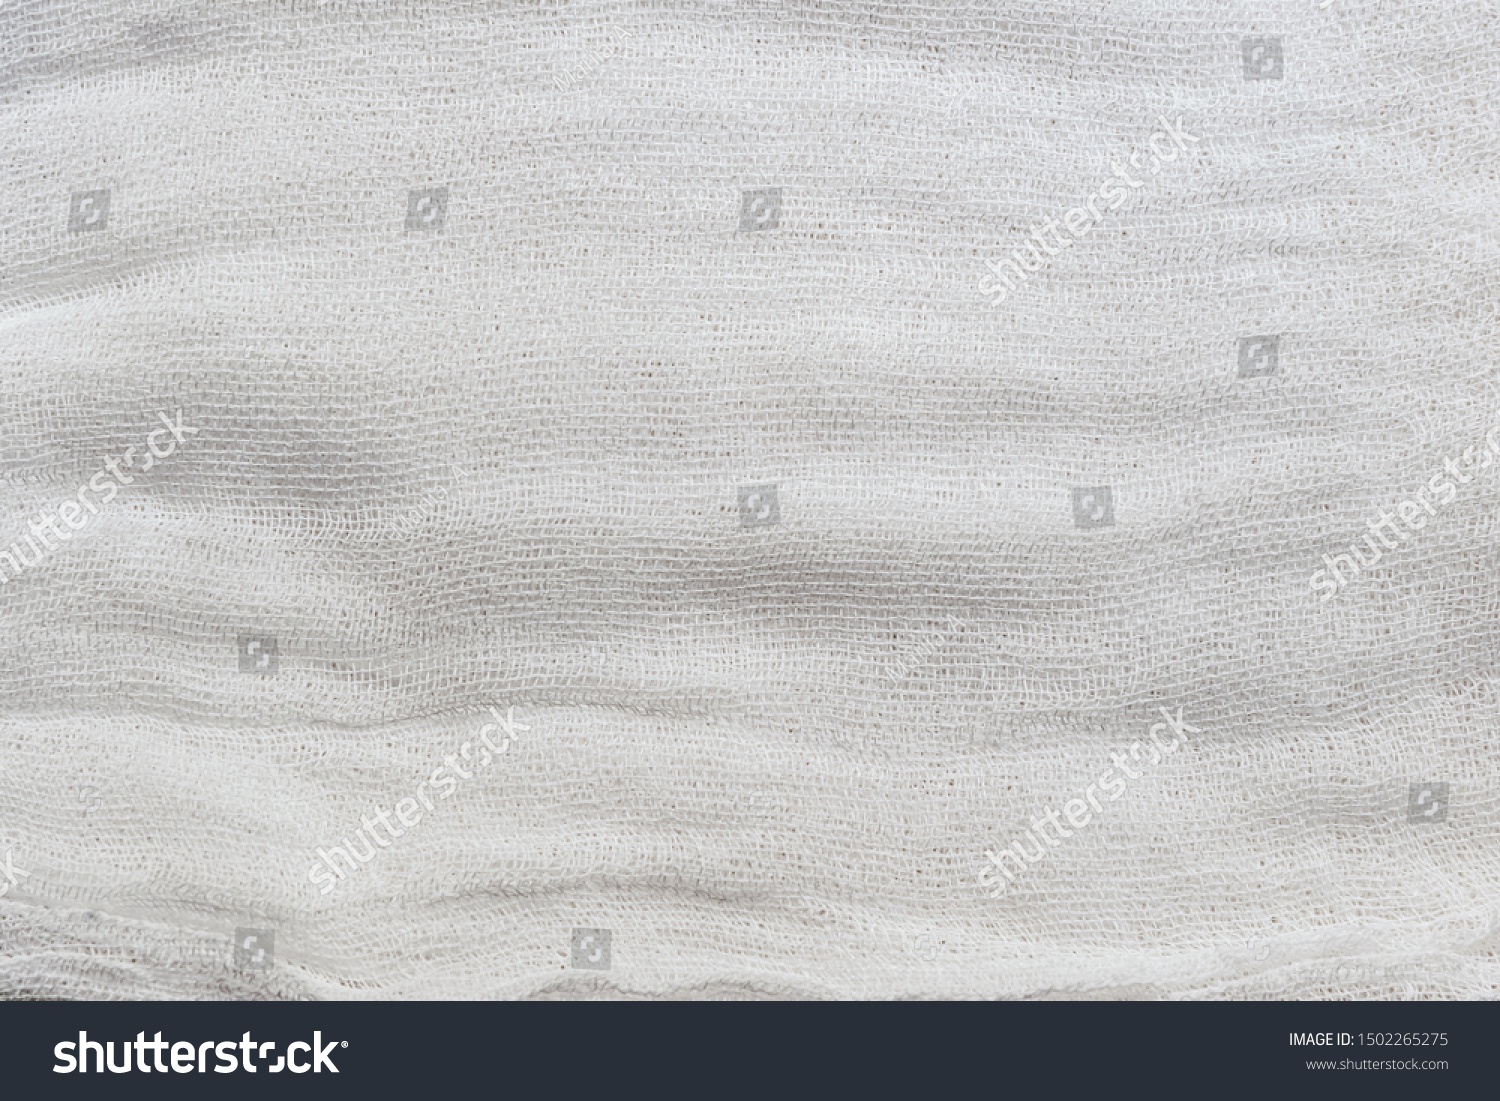 abstract background of cheesecloth close up #1502265275